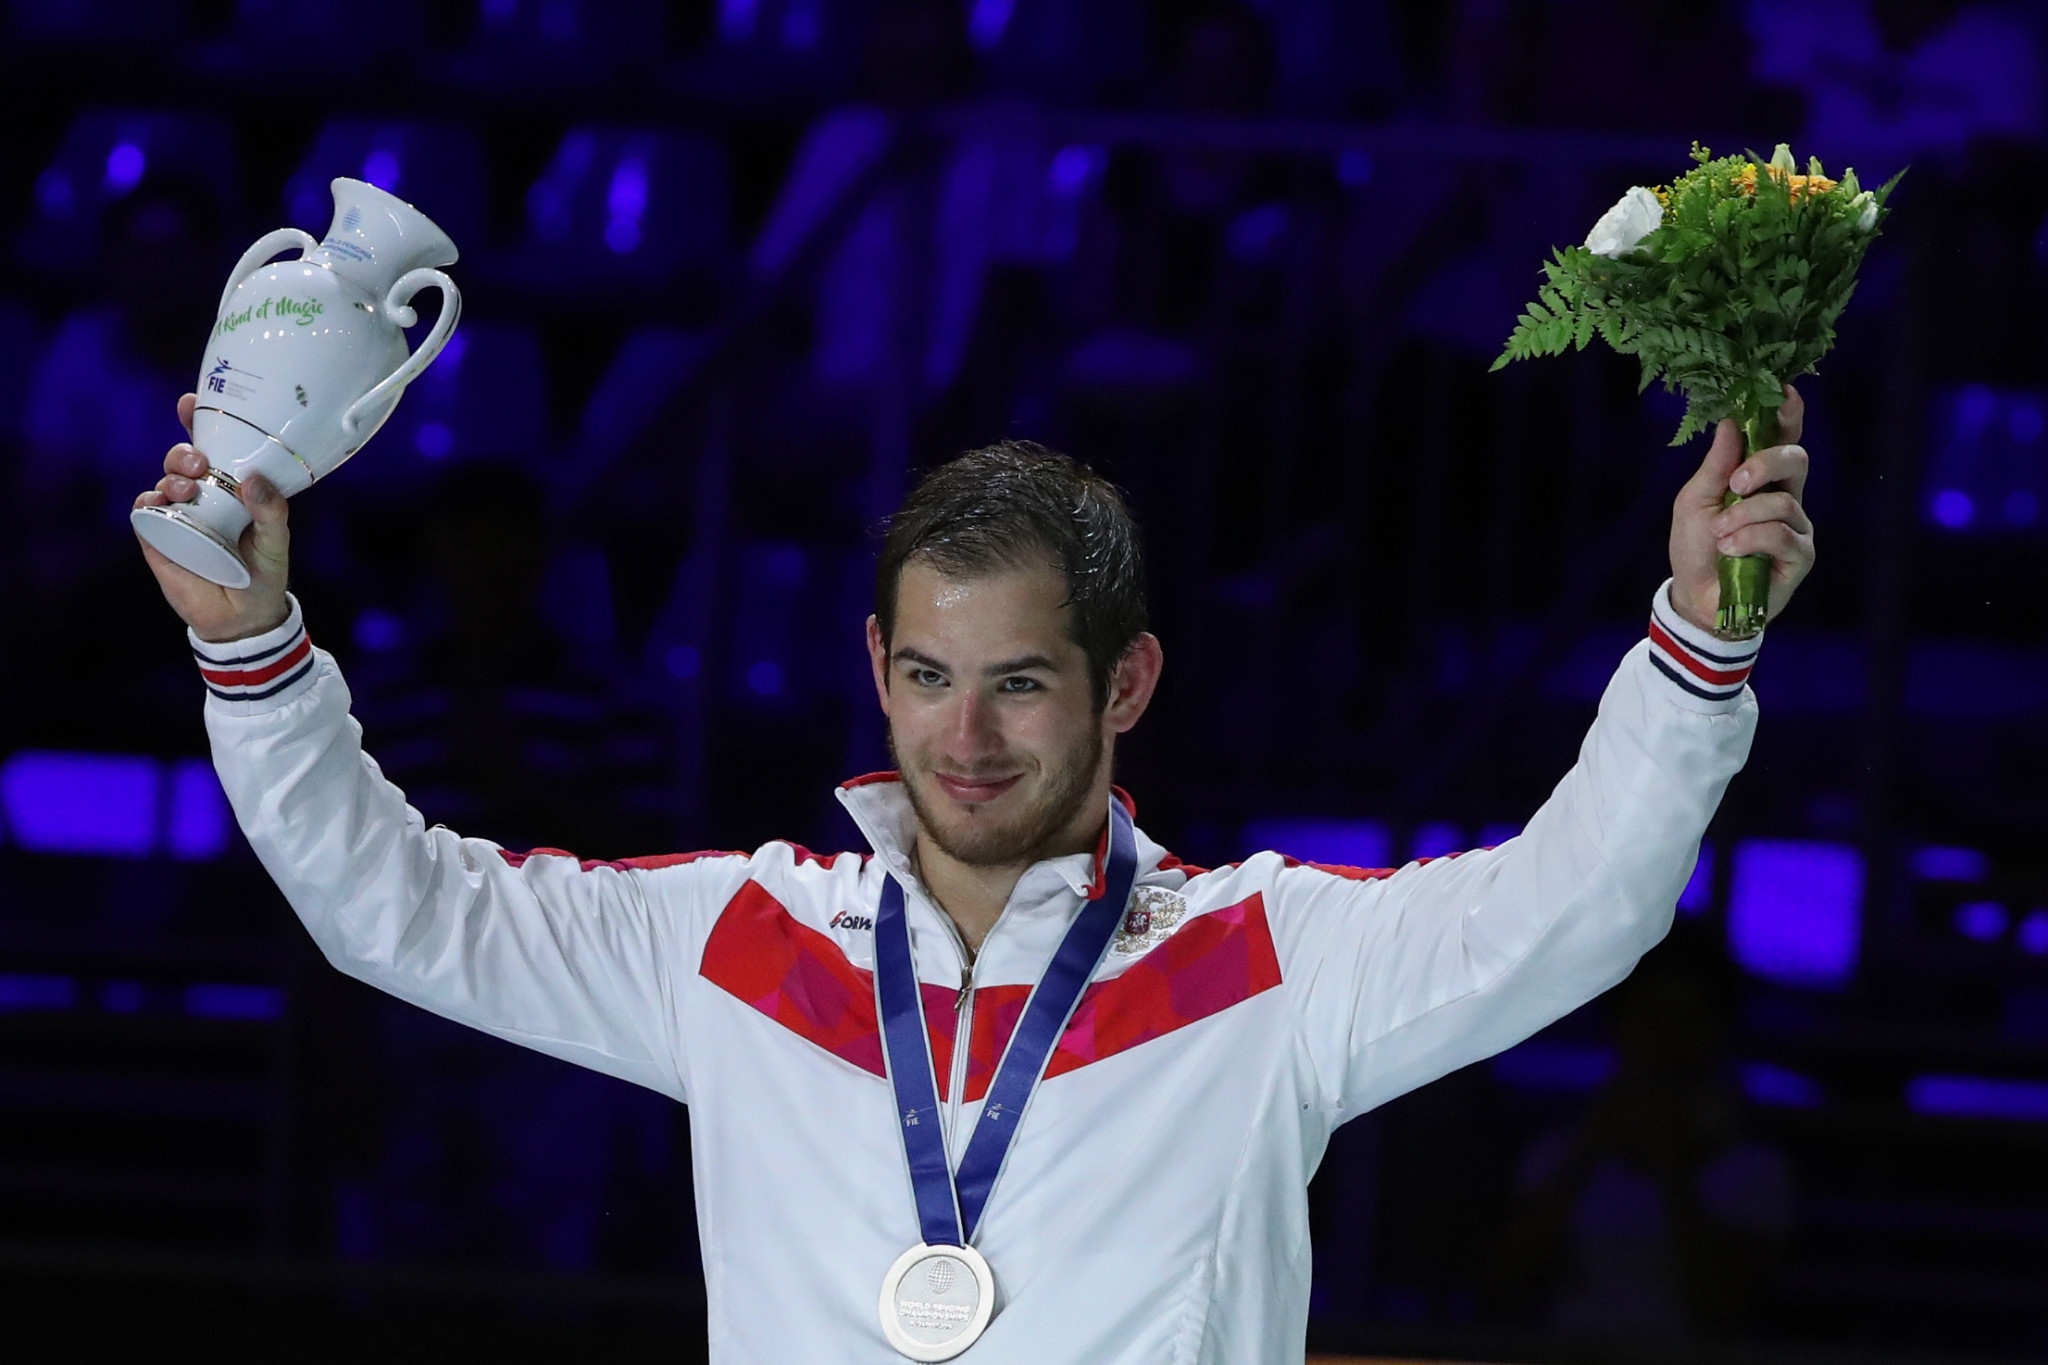 World silver medallist Sergey Bida will be aiming for success at the FIE Épée Grand Prix in Doha ©Getty Images